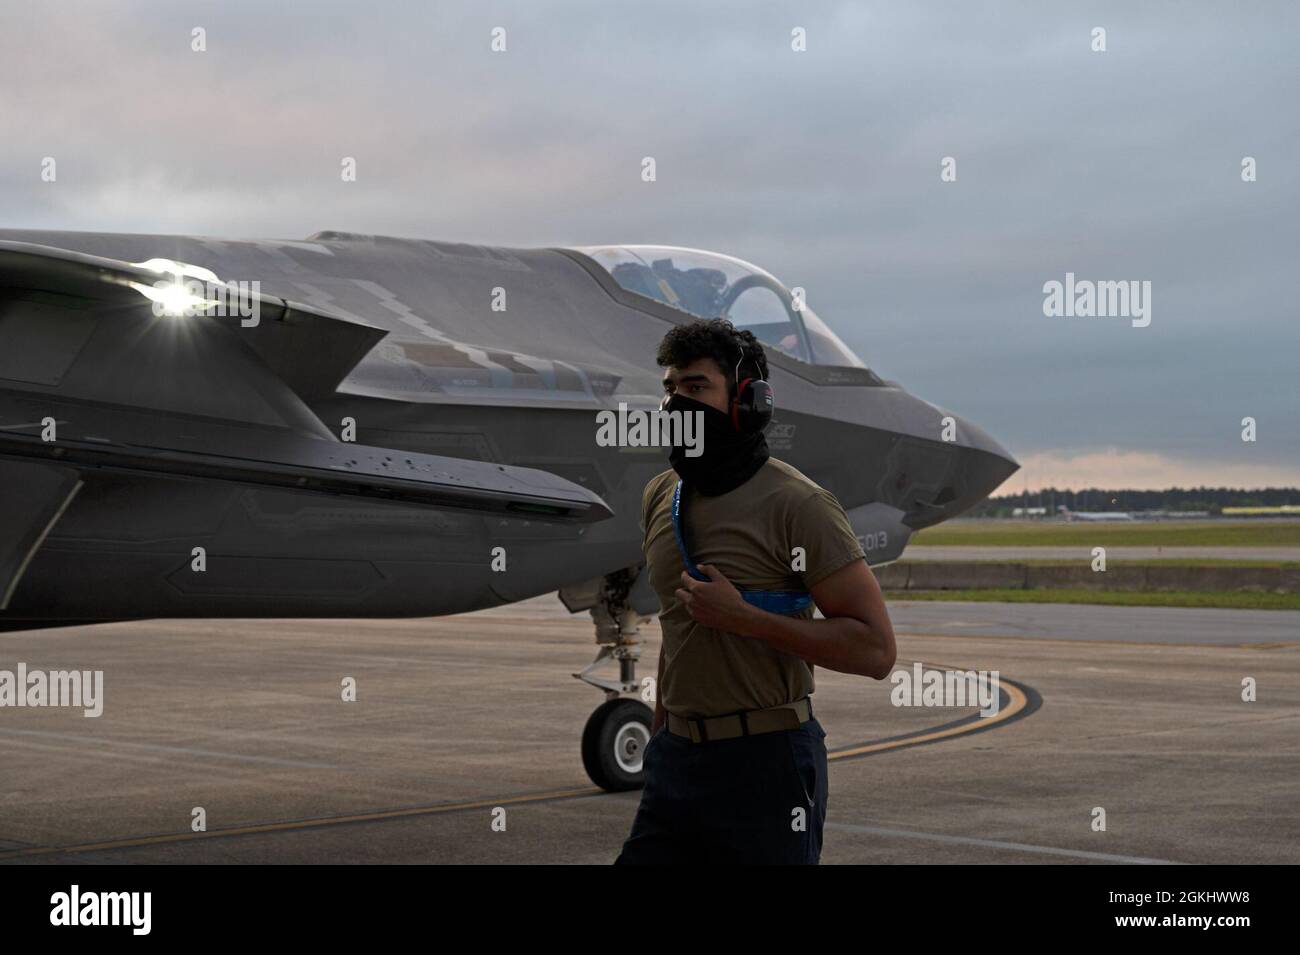 https://c8.alamy.com/comp/2GKHWW8/us-air-force-airman-1st-class-jaivon-bland-33rd-aircraft-maintenance-squadron-crew-chief-finishes-marshaling-a-jet-april-27-2021-at-eglin-air-force-base-florida-the-58th-fighter-squadron-and-33rd-aircraft-maintenance-squadron-conduct-night-flying-operations-to-accommodate-pilot-training-qualification-requirements-2GKHWW8.jpg